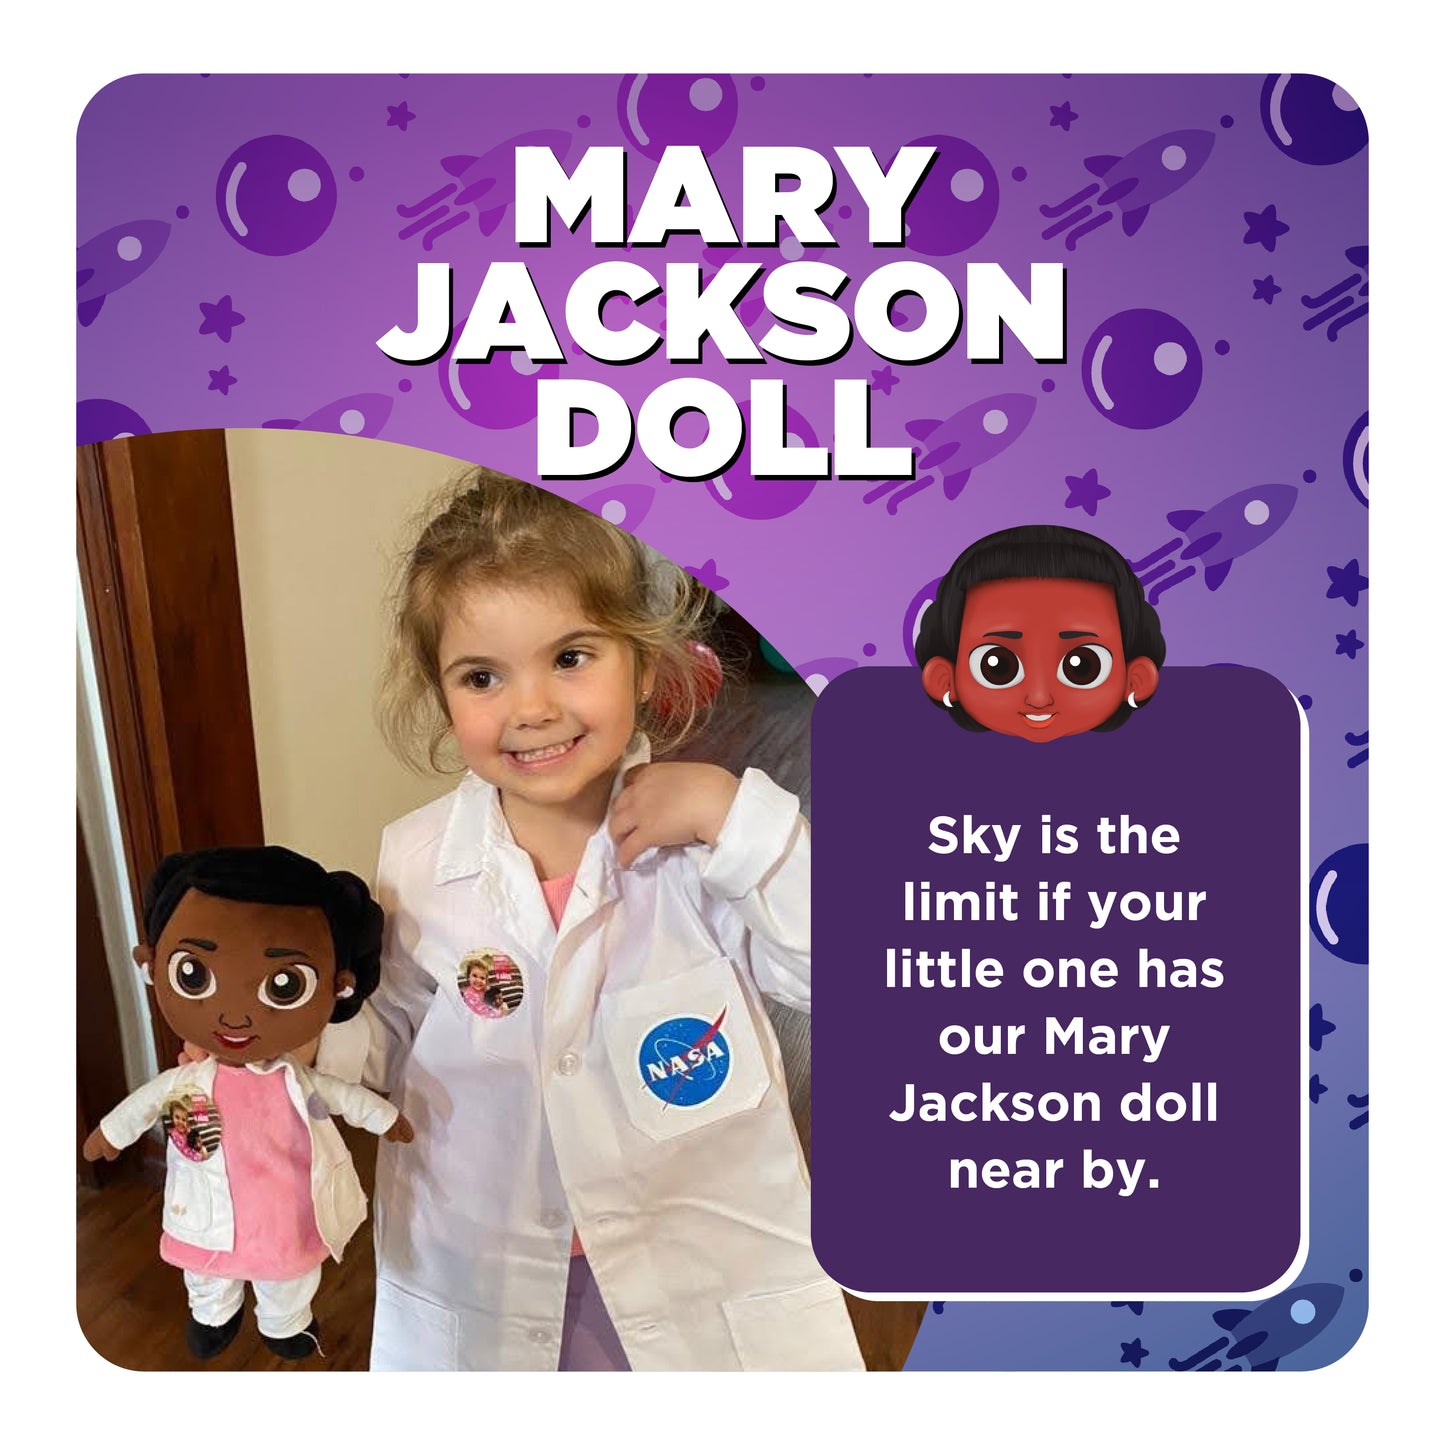 Explore the Stars with Mary Jackson: The Interactive Plush Companion for Learning and Playtime!